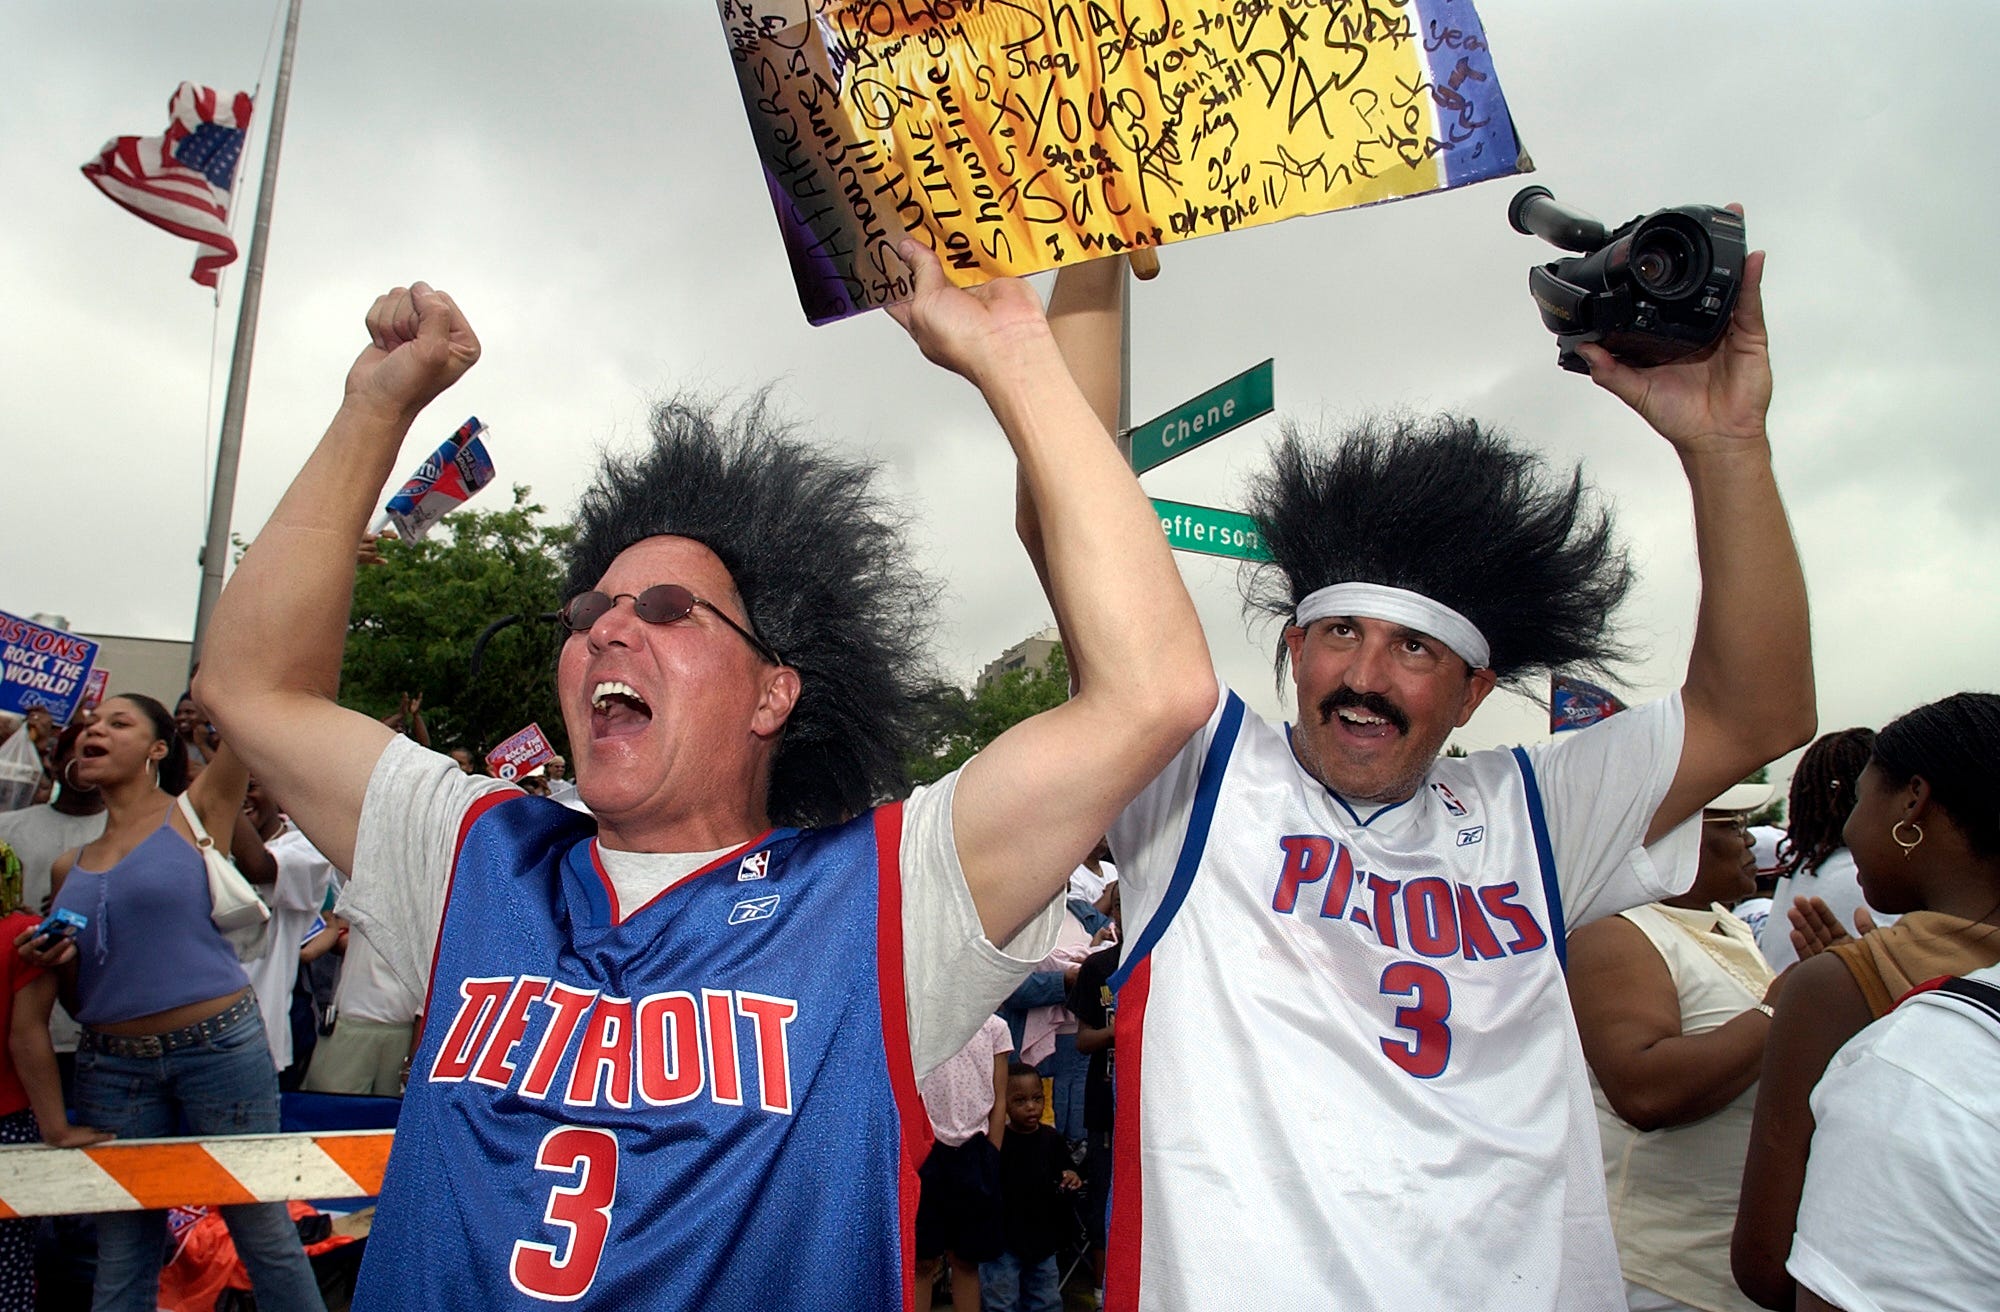 Fans cheer the Pistons during the parade.